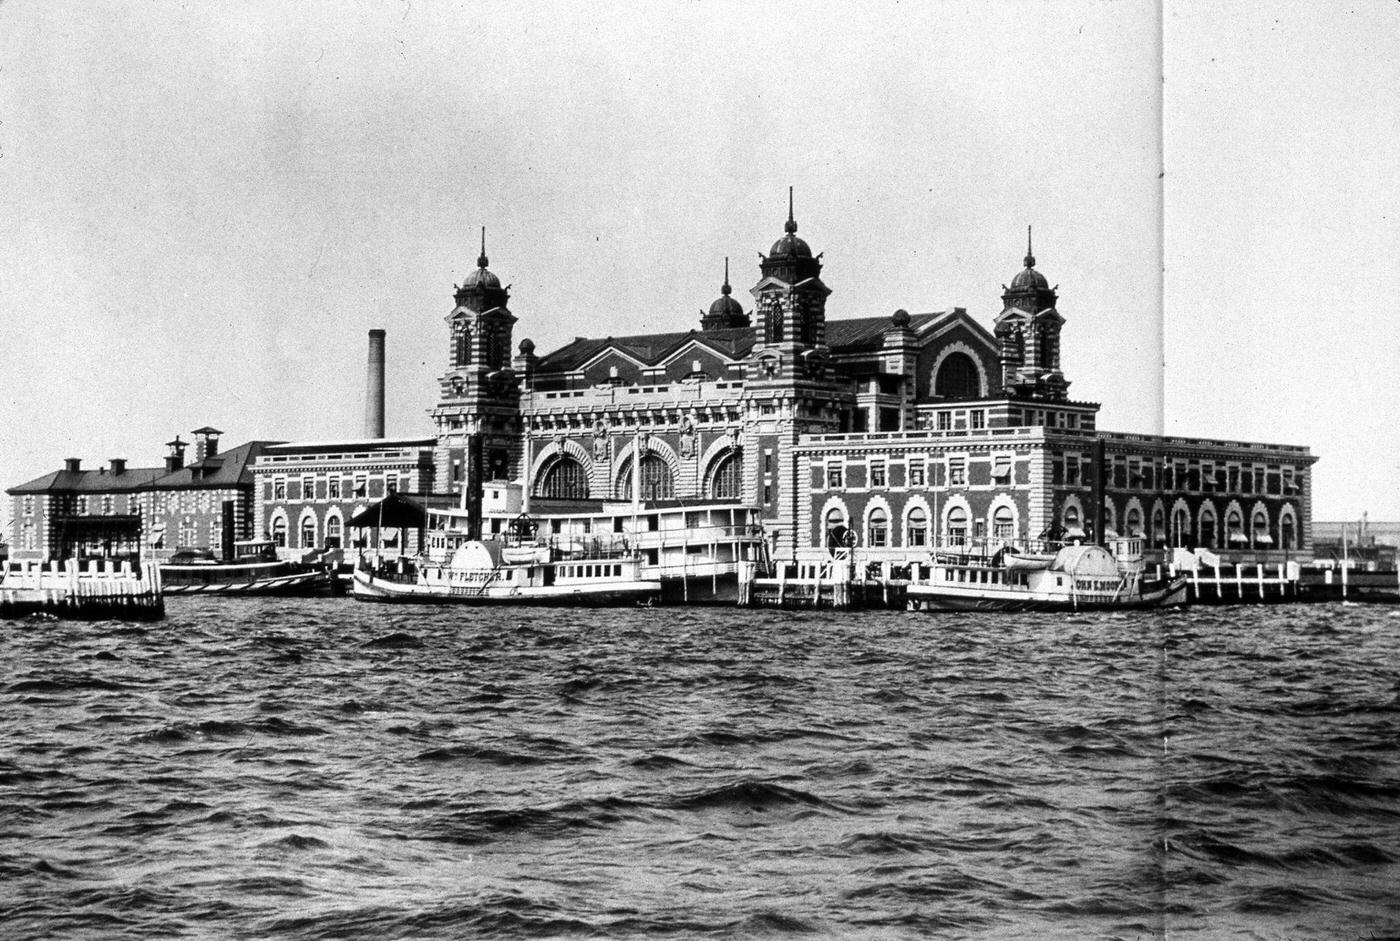 A view of Ellis Island in New York Bay, run by the US Immigration Service. Between 1892 and 1954 over 20 million immigrants to the USA passed through it on their way to a new life.